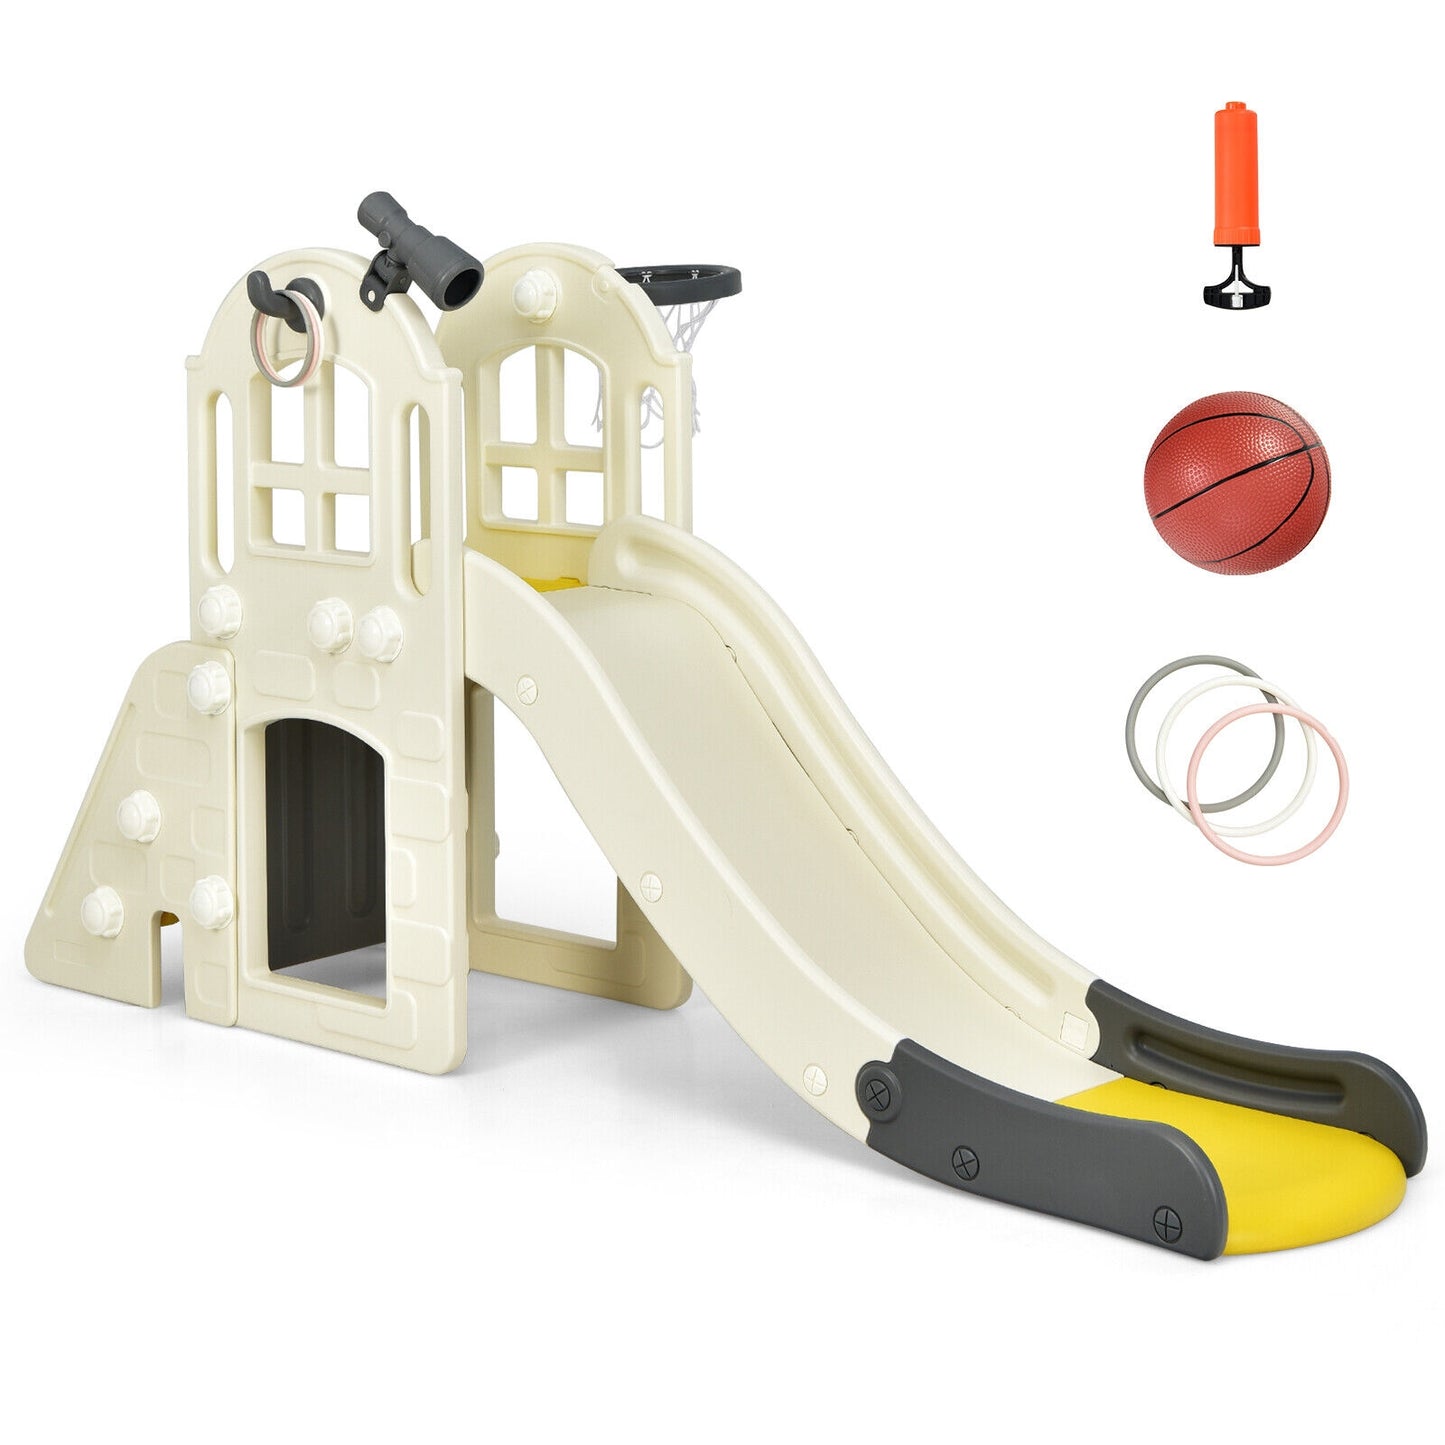 6-In-1 Large Slide for Kids Toddler Climber Slide Playset with Basketball Hoop-Yellow